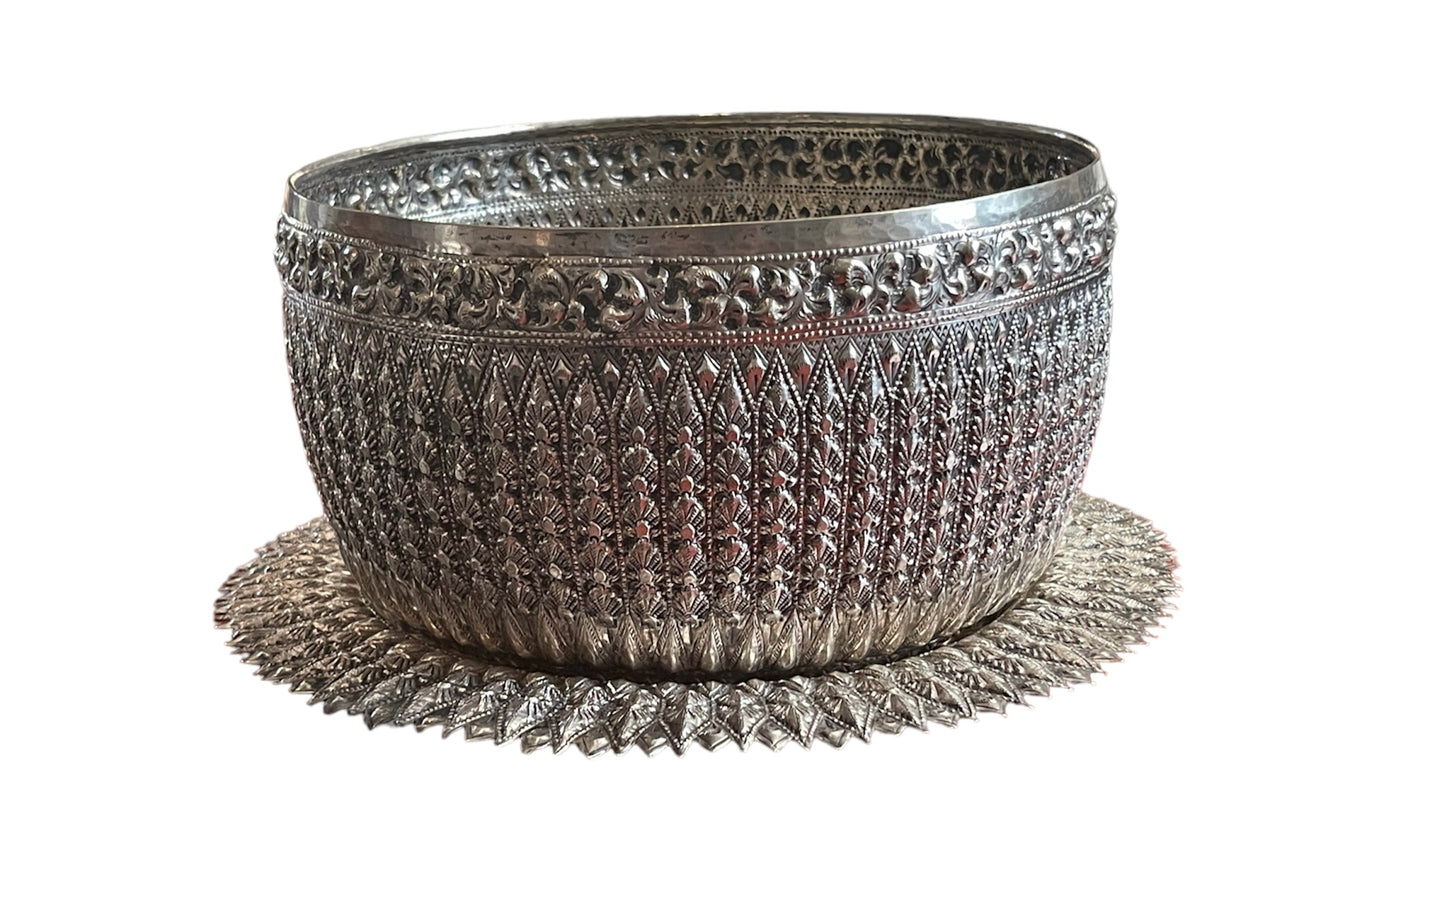 An antique southeast Asian large carved silver bowl and plate